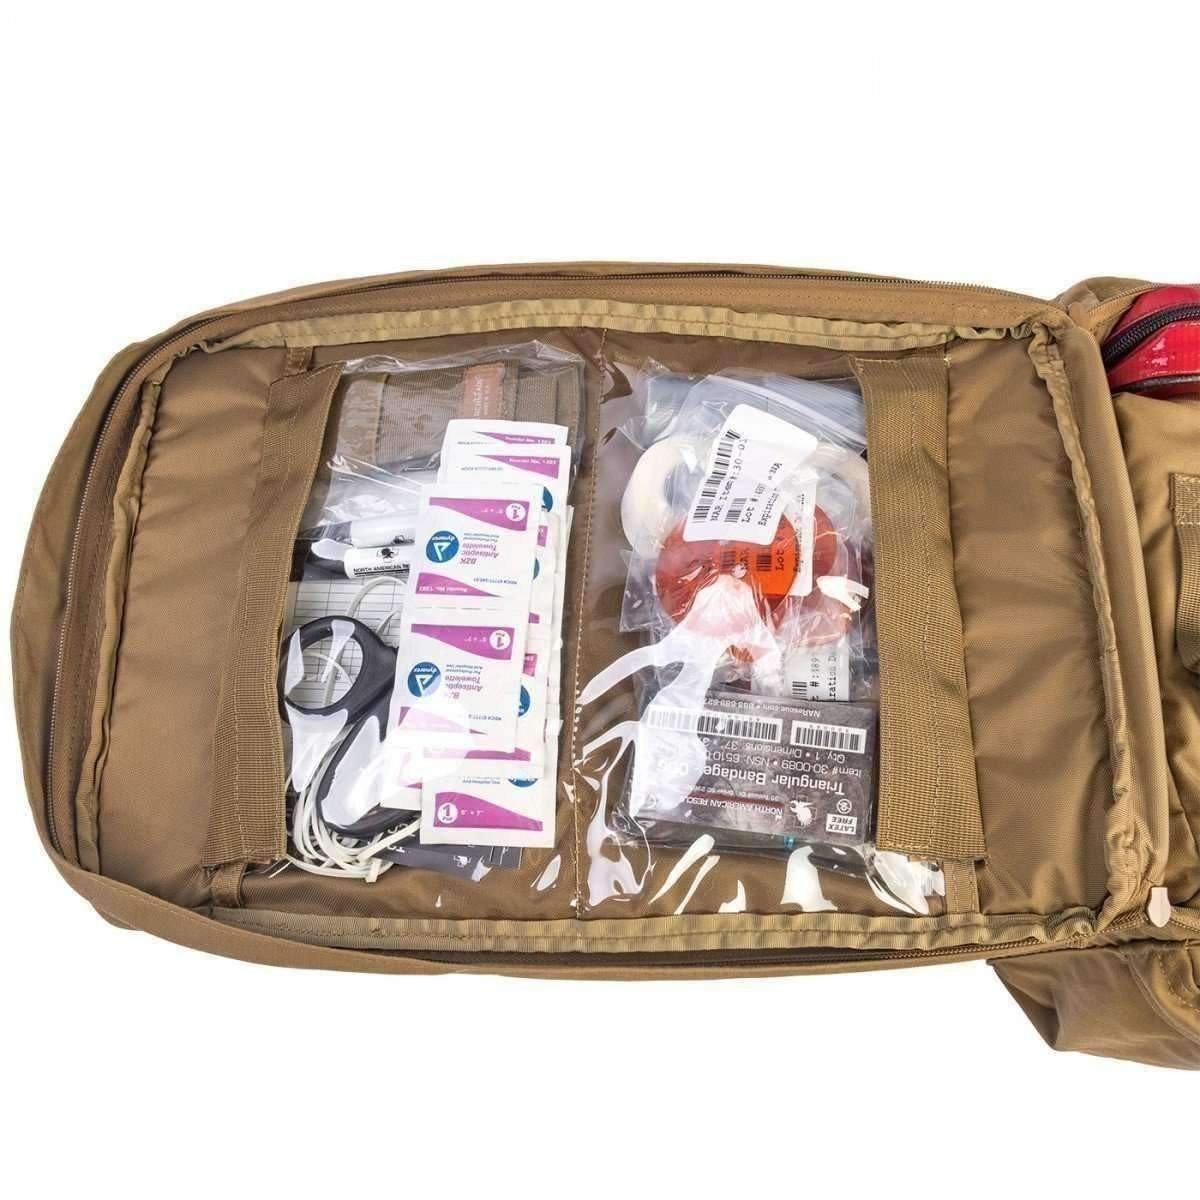 Expeditionary Casualty Response Kit - Vendor